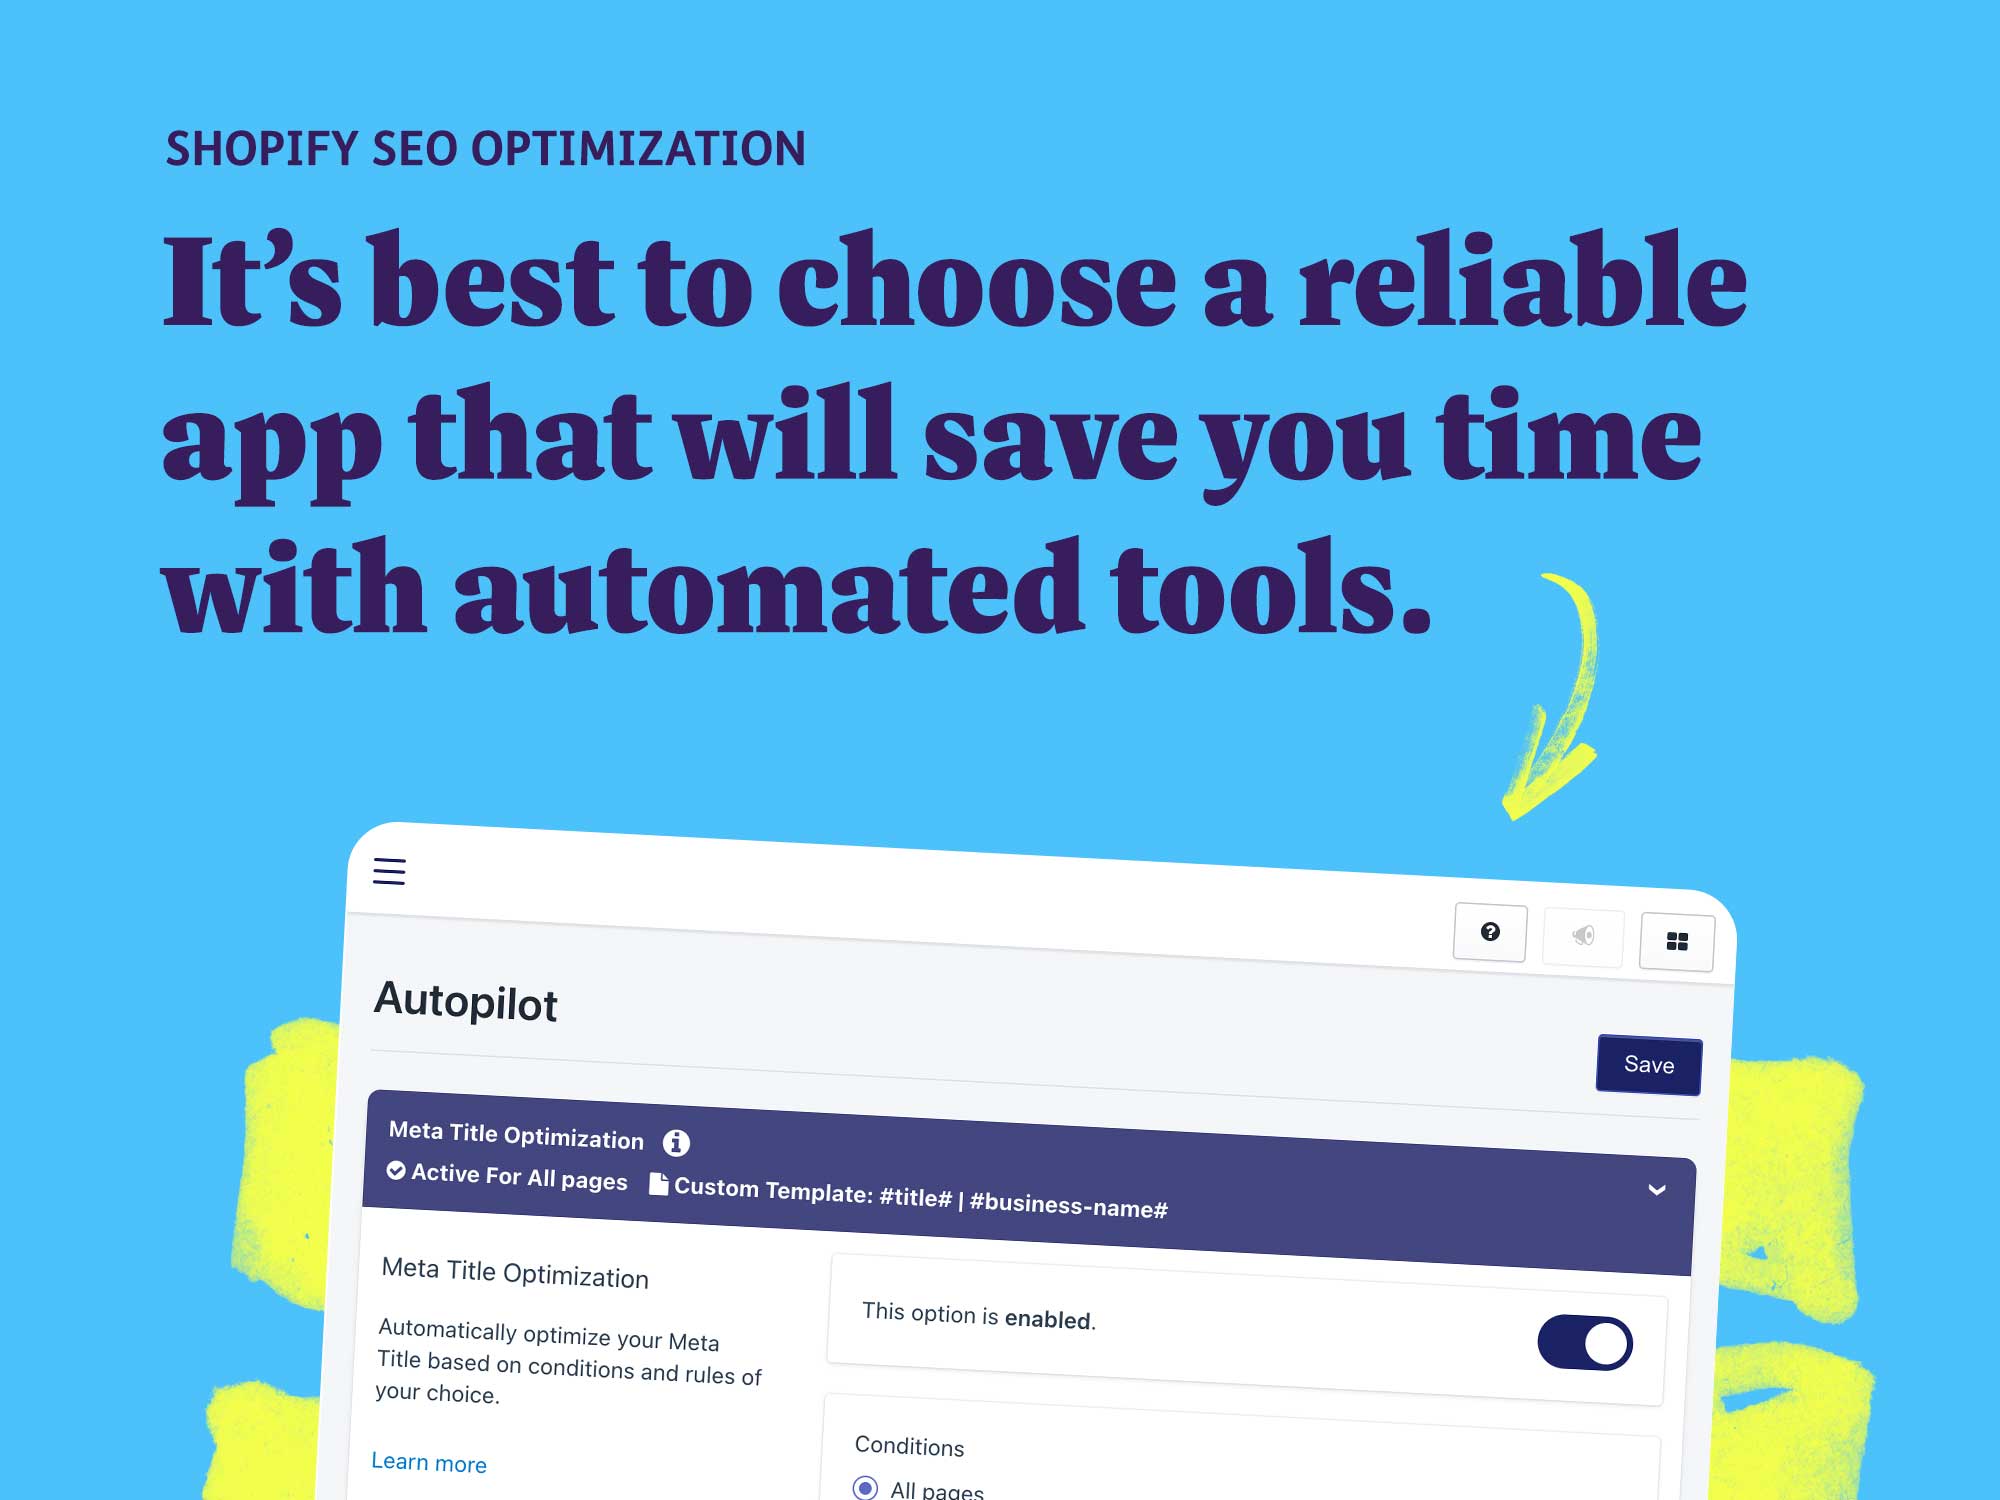 Shopify SEO optimization: It’s best to choose a reliable app that will save you time with automated tools.